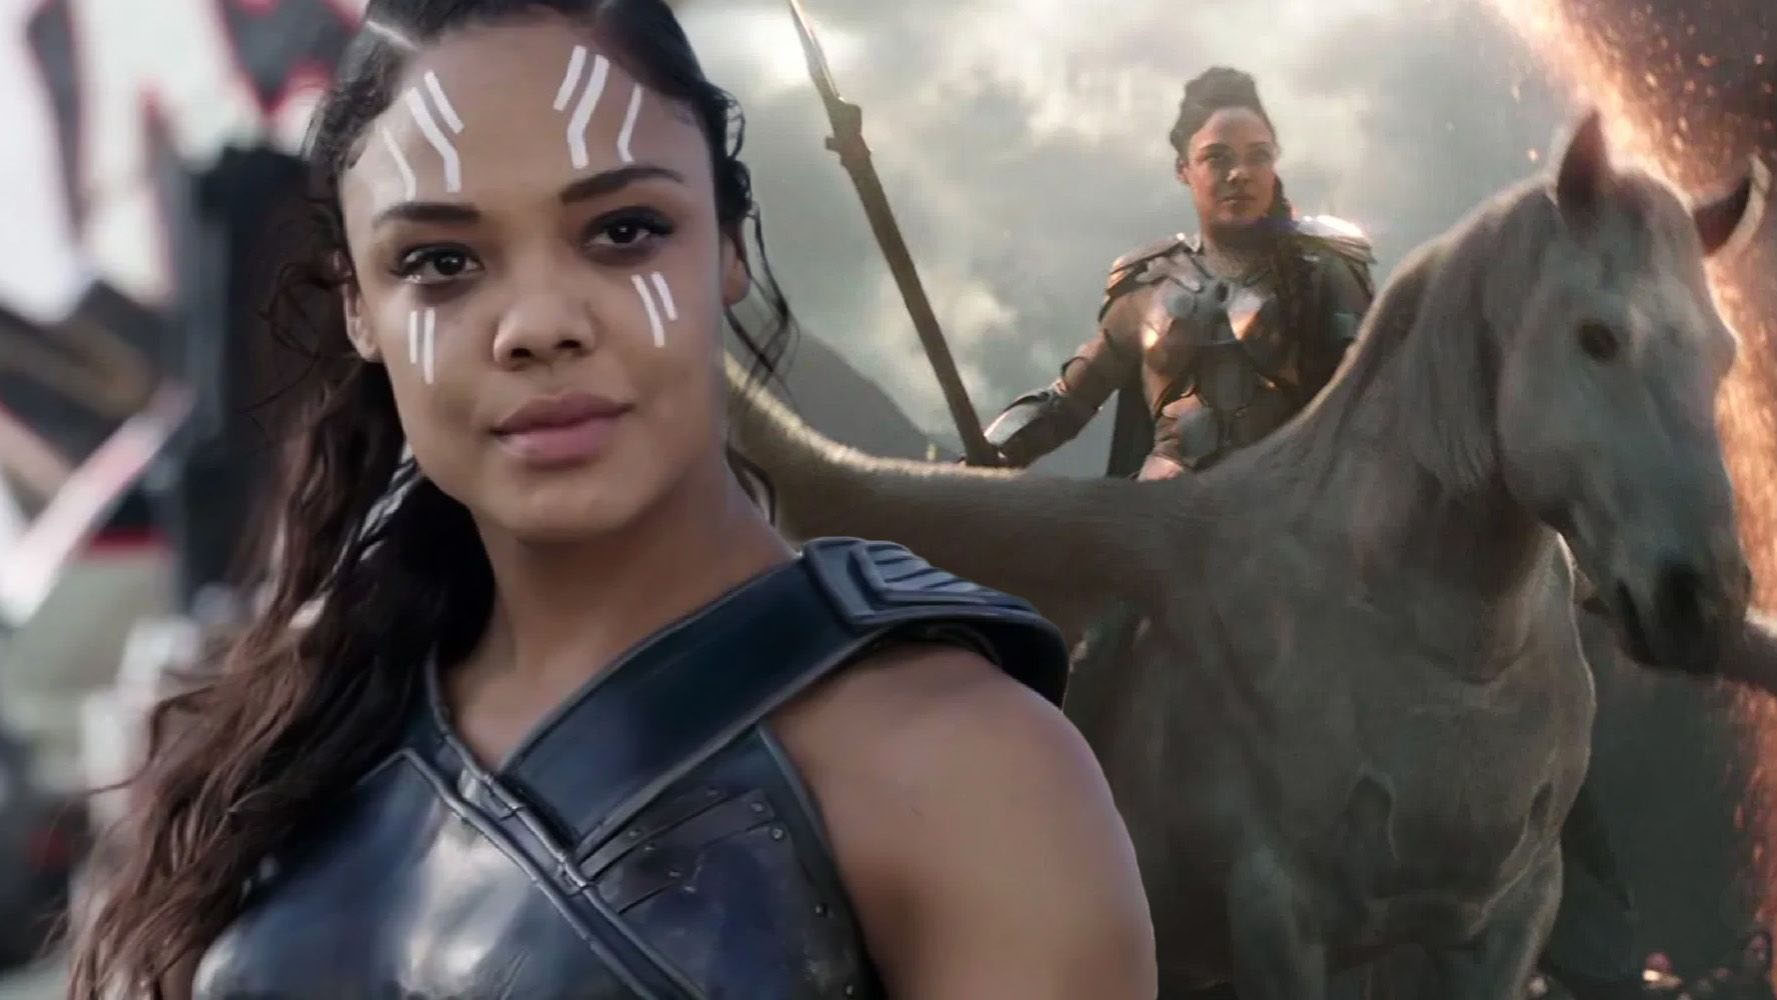 Valkyrie is a fictional superheroine appearing in American comic books published by Marvel Comics. The character, based on the Norse mythological figu...